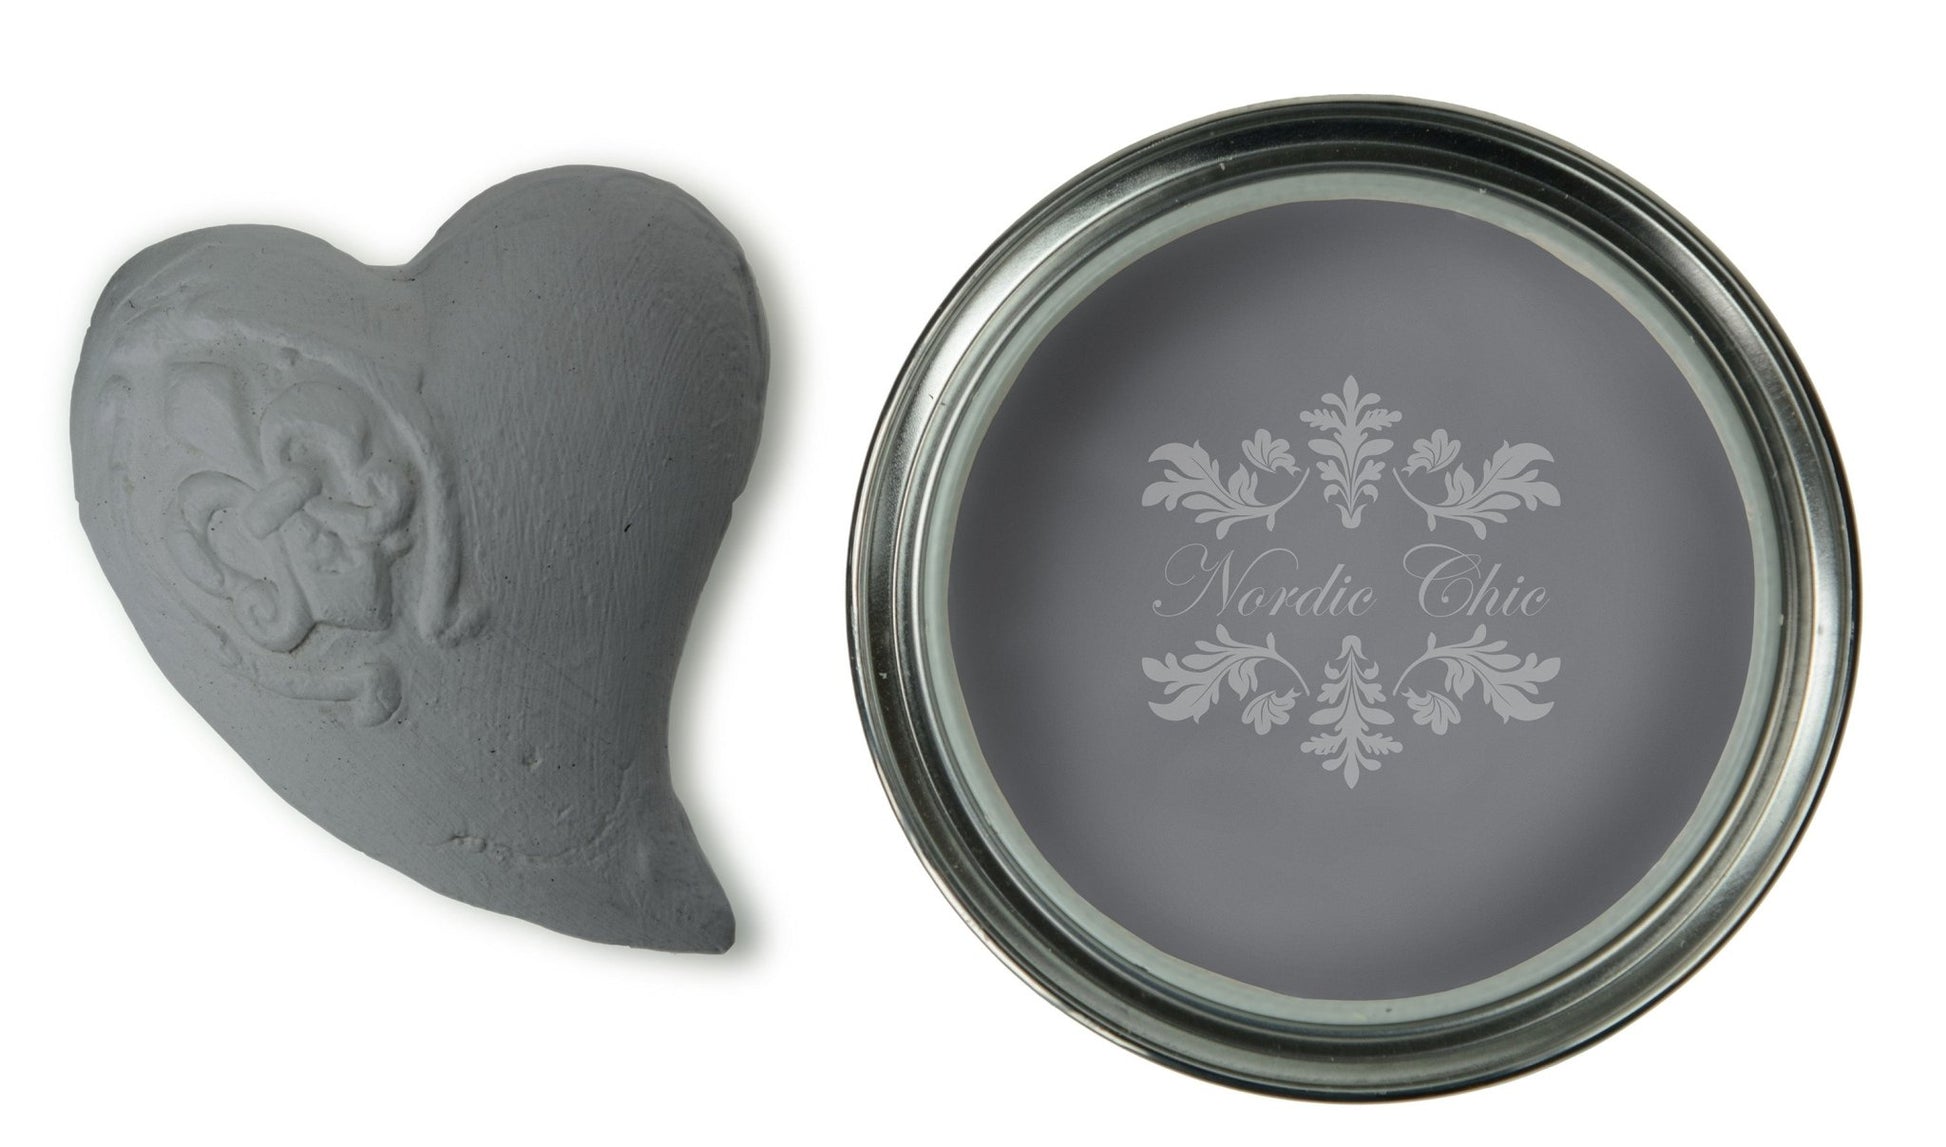 Nordic Chic Furniture Paint - Stormy Grey - Nordic Chic®